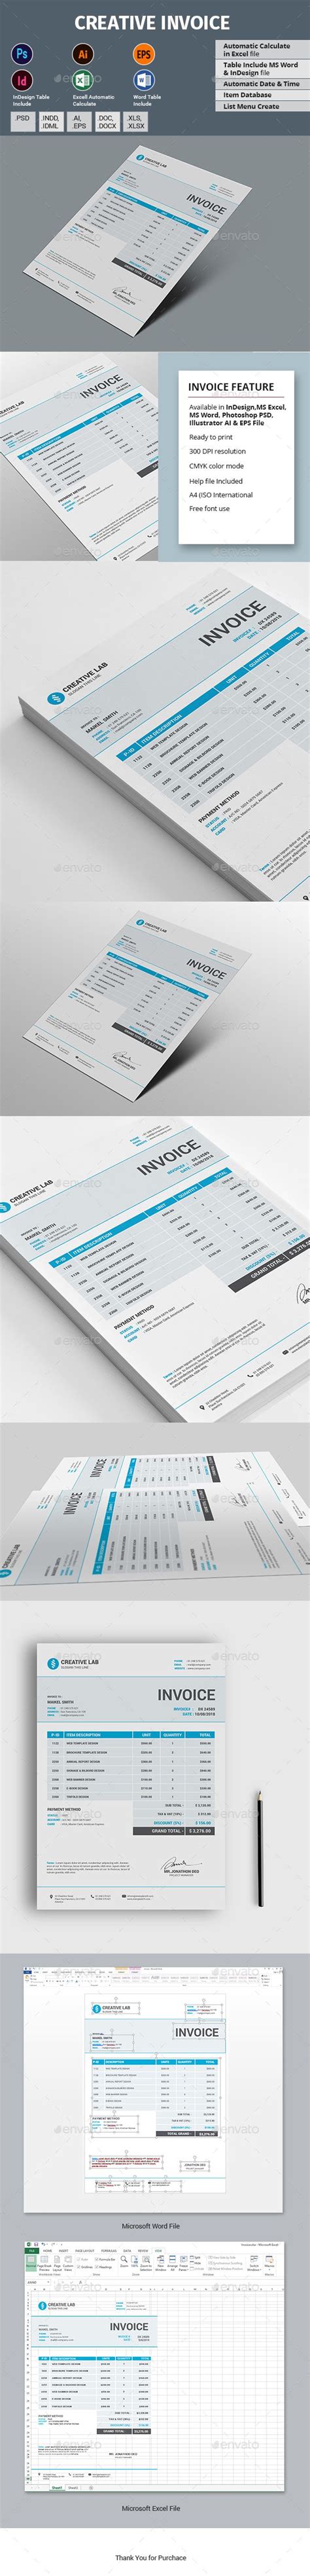 Creative Invoice Template PSD Vector EPS InDesign INDD AI Illustrator MS Word Stationery